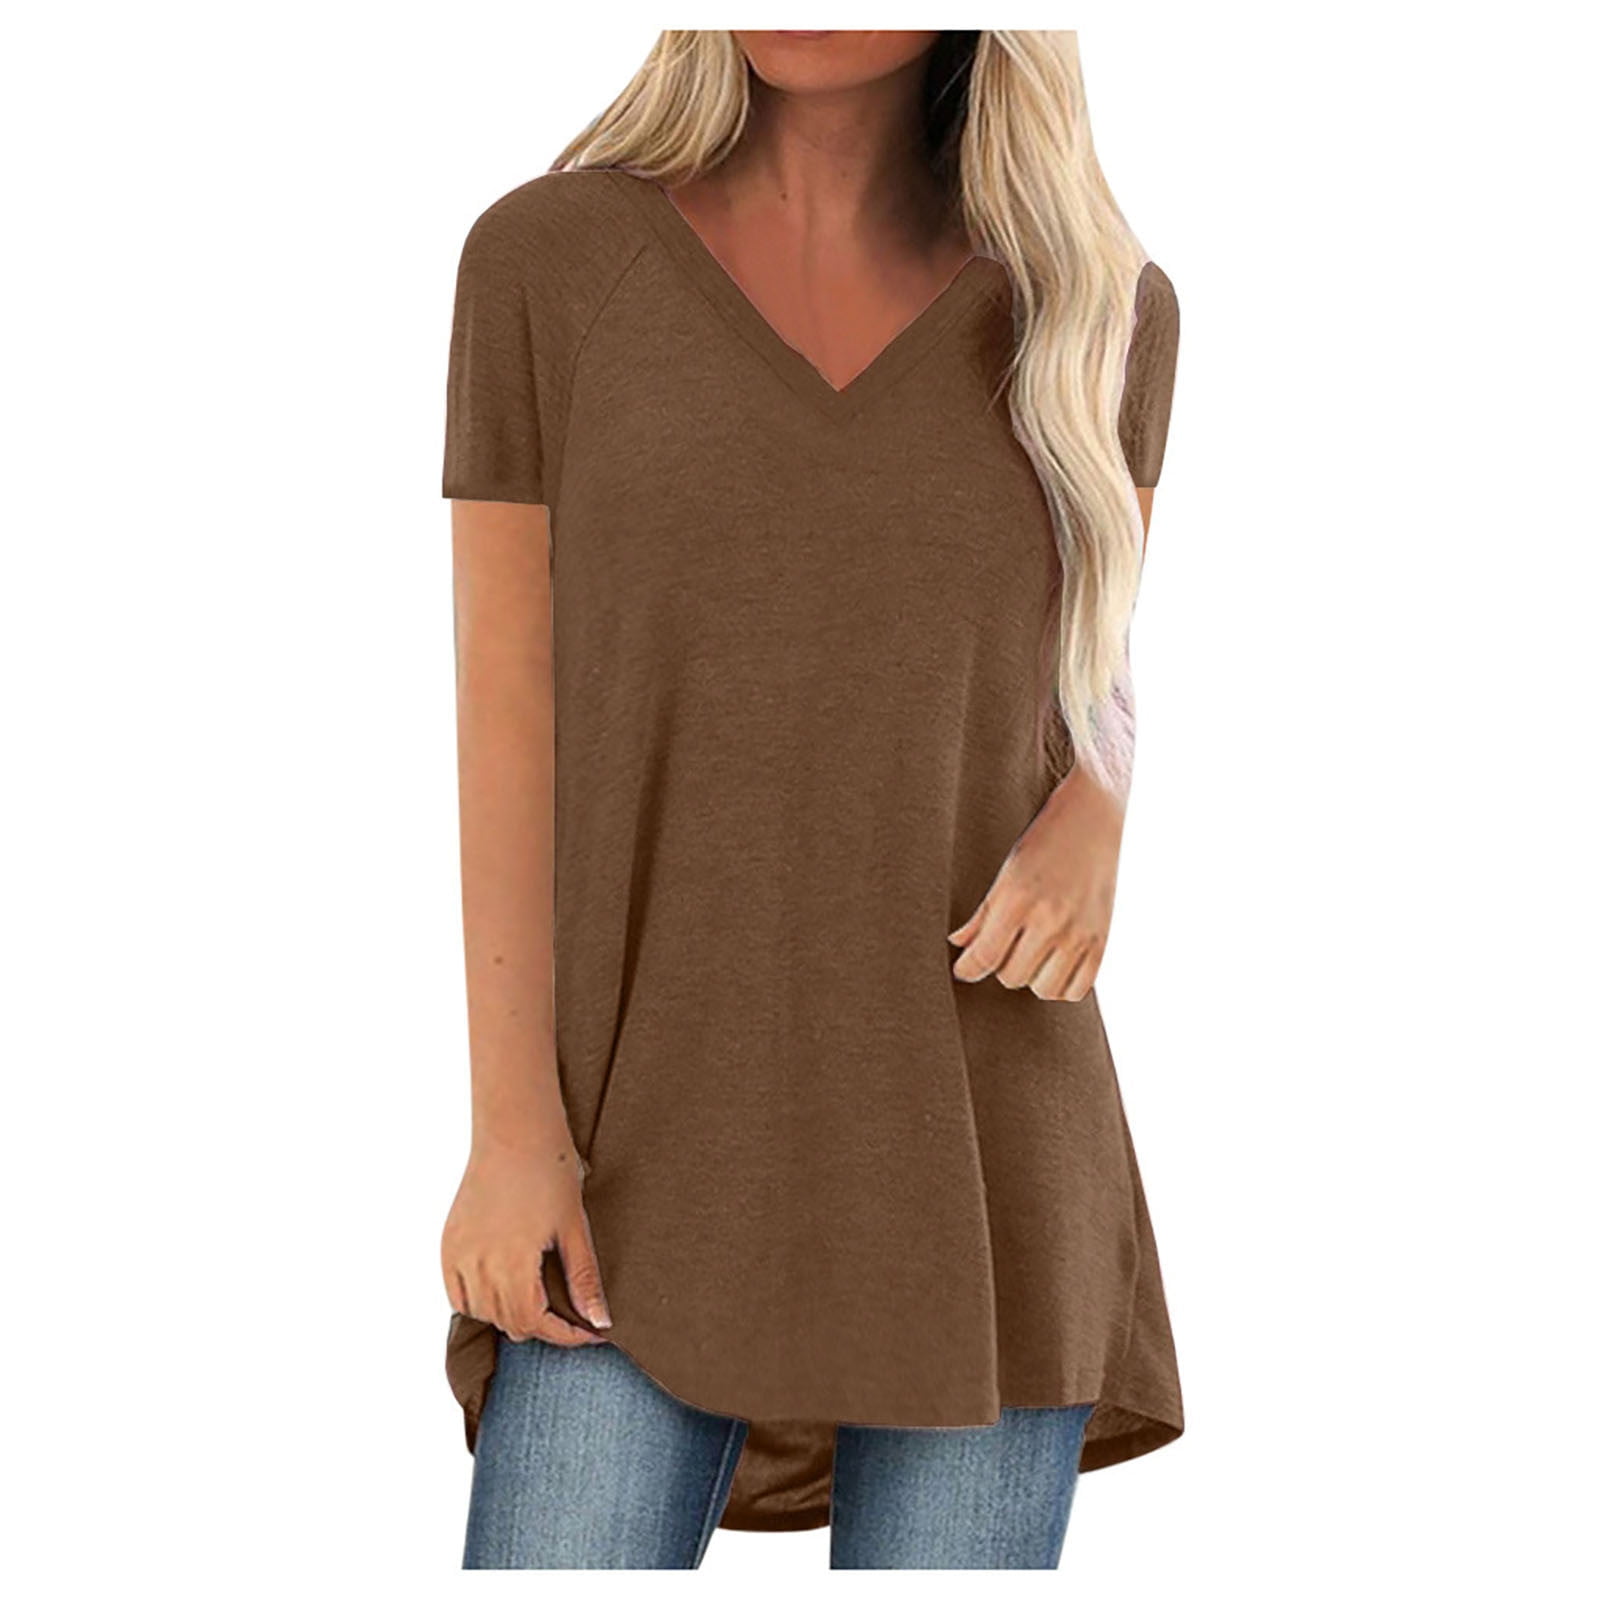 Heather Plus Size Tunic Tops for Women Long Flowy Shirts for